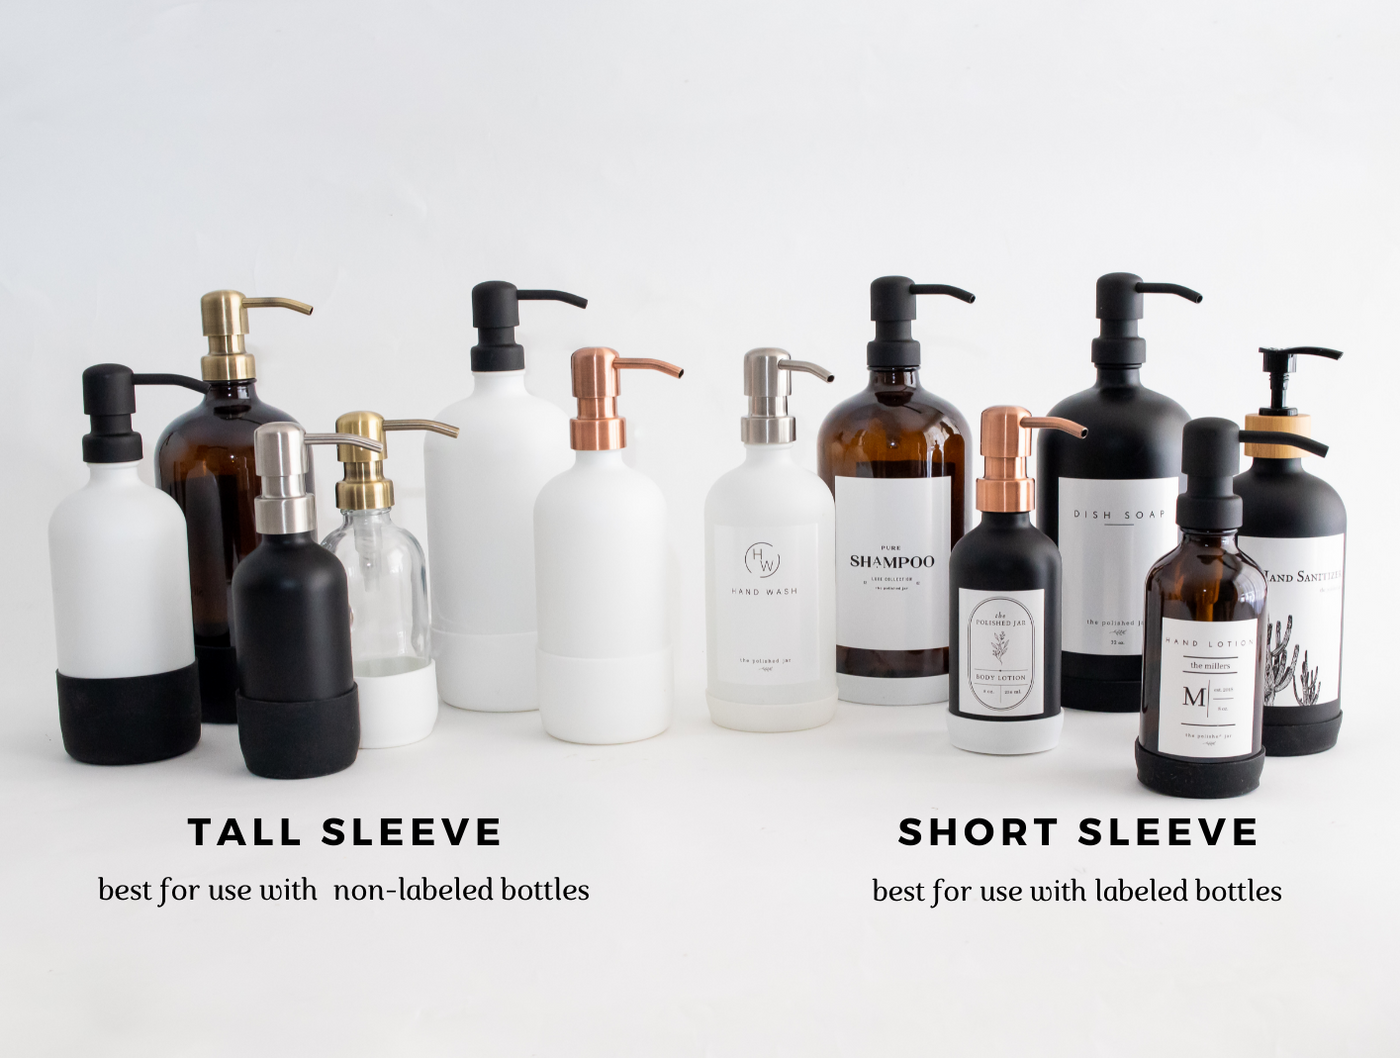 Glass Soap Dispenser | Desert Terra Collection in Labeled, Printed & Engraved